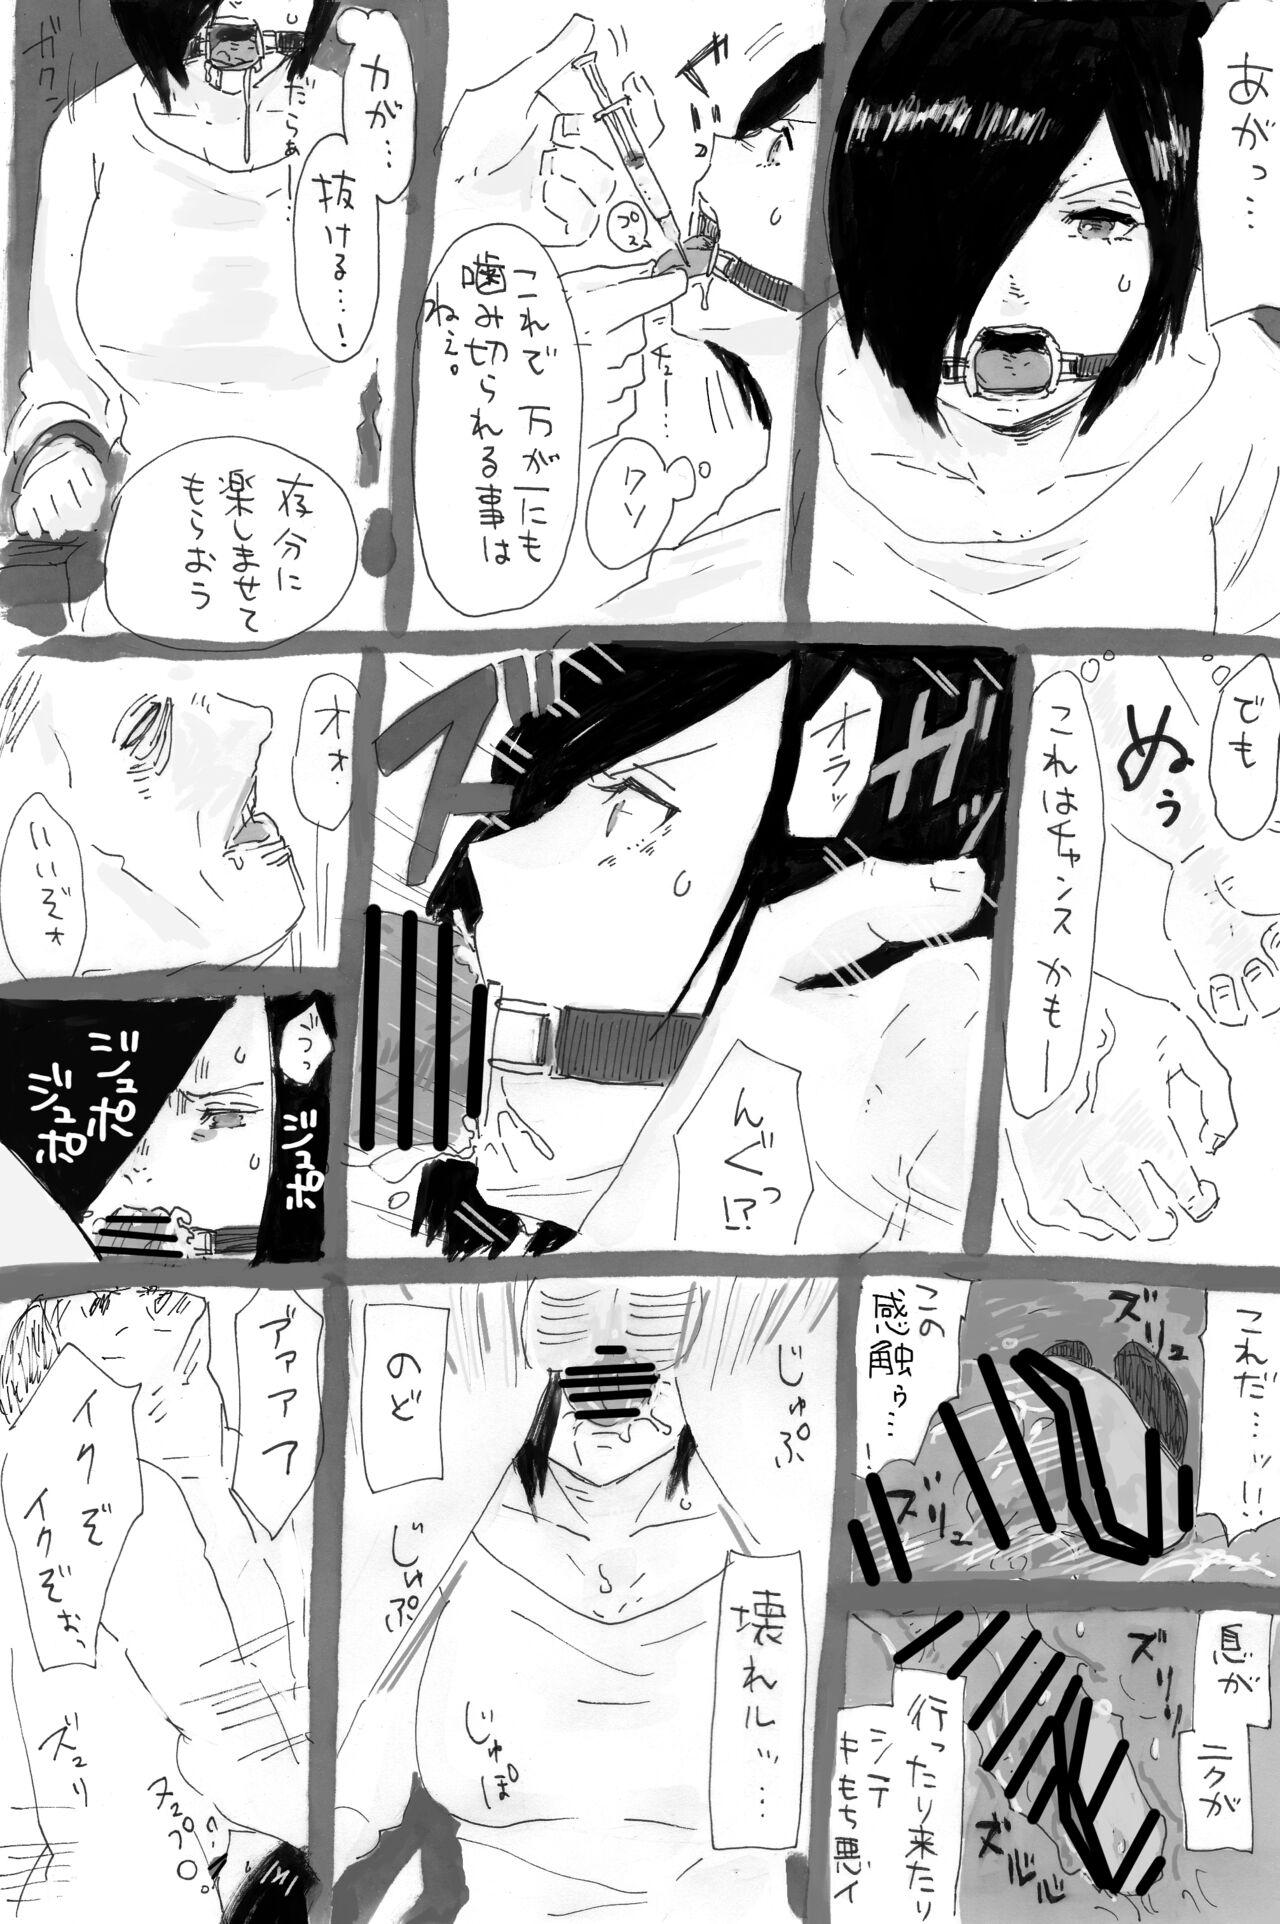 Spying トーカちゃん囚われIF - Tokyo ghoul Short - Page 11